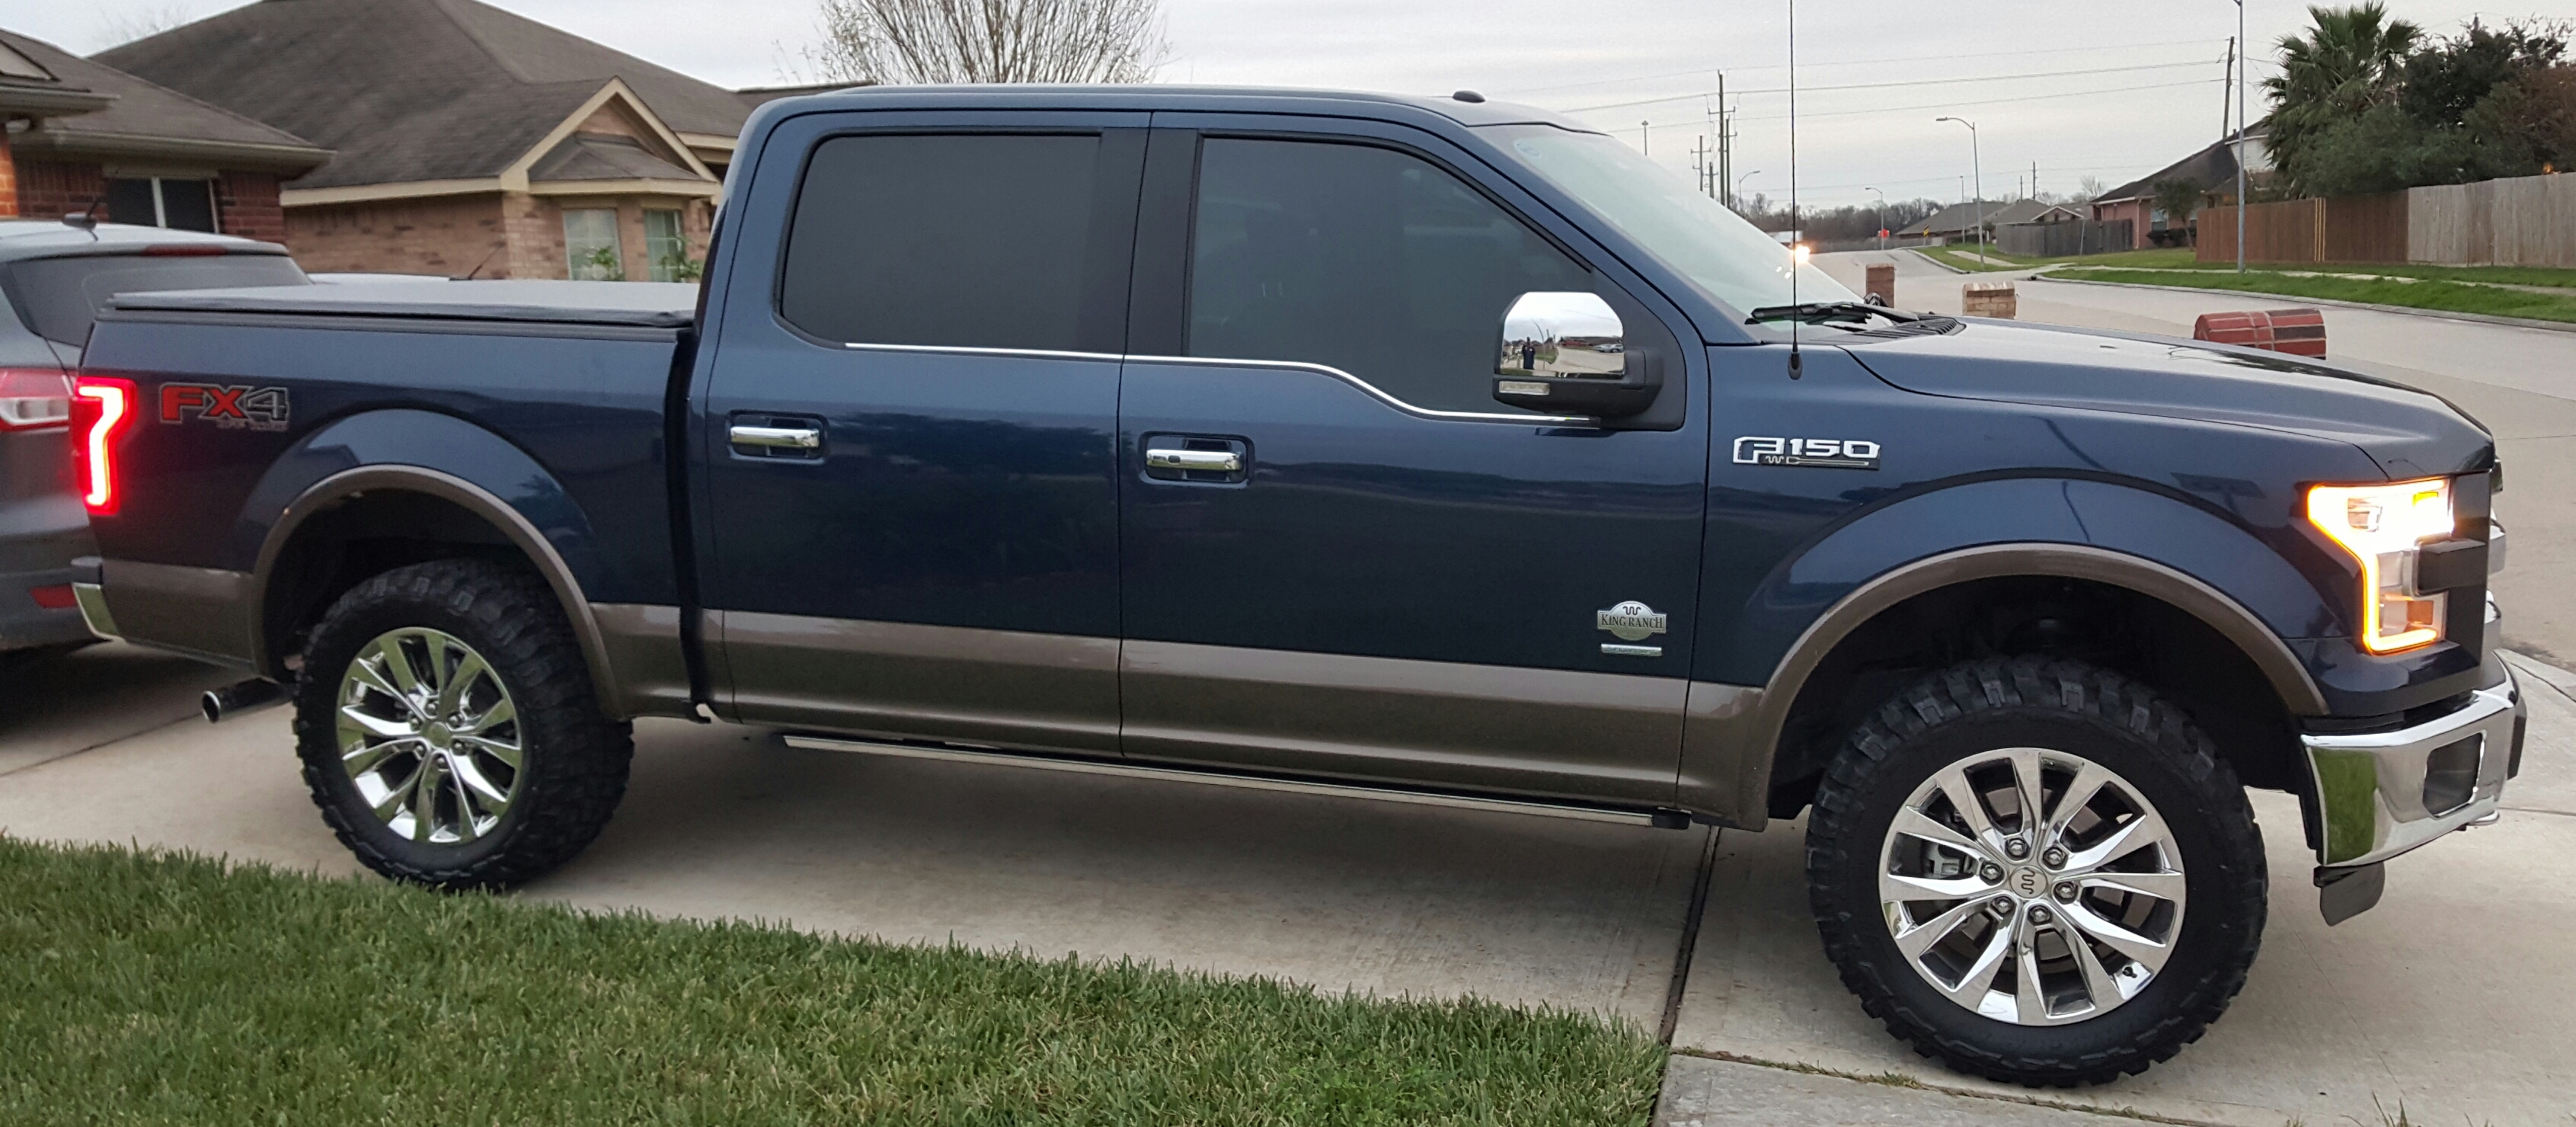 Lets see your wheels/tire setup on 2015+ - Page 4 - Ford ...